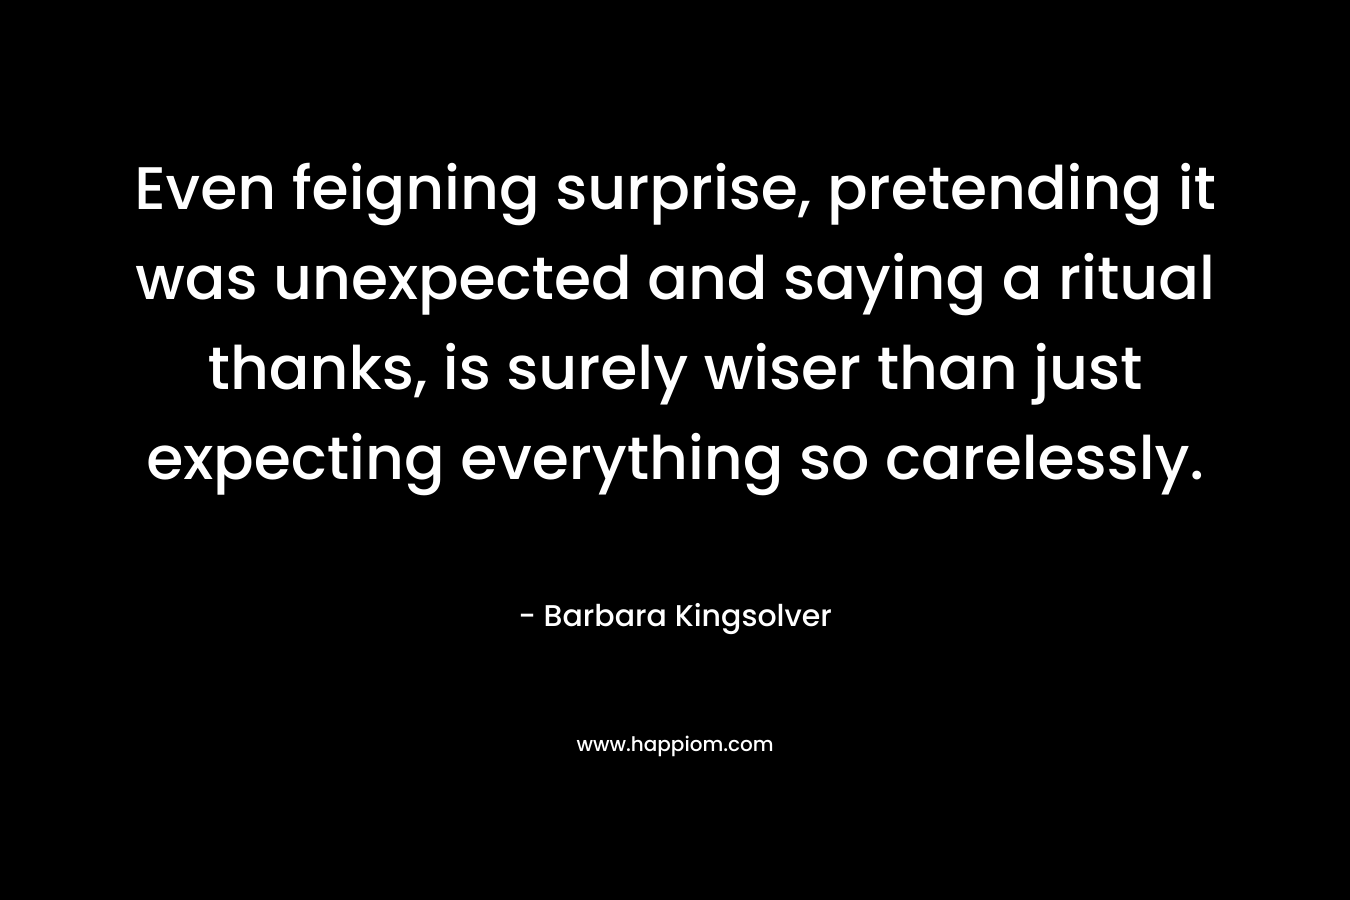 Even feigning surprise, pretending it was unexpected and saying a ritual thanks, is surely wiser than just expecting everything so carelessly.